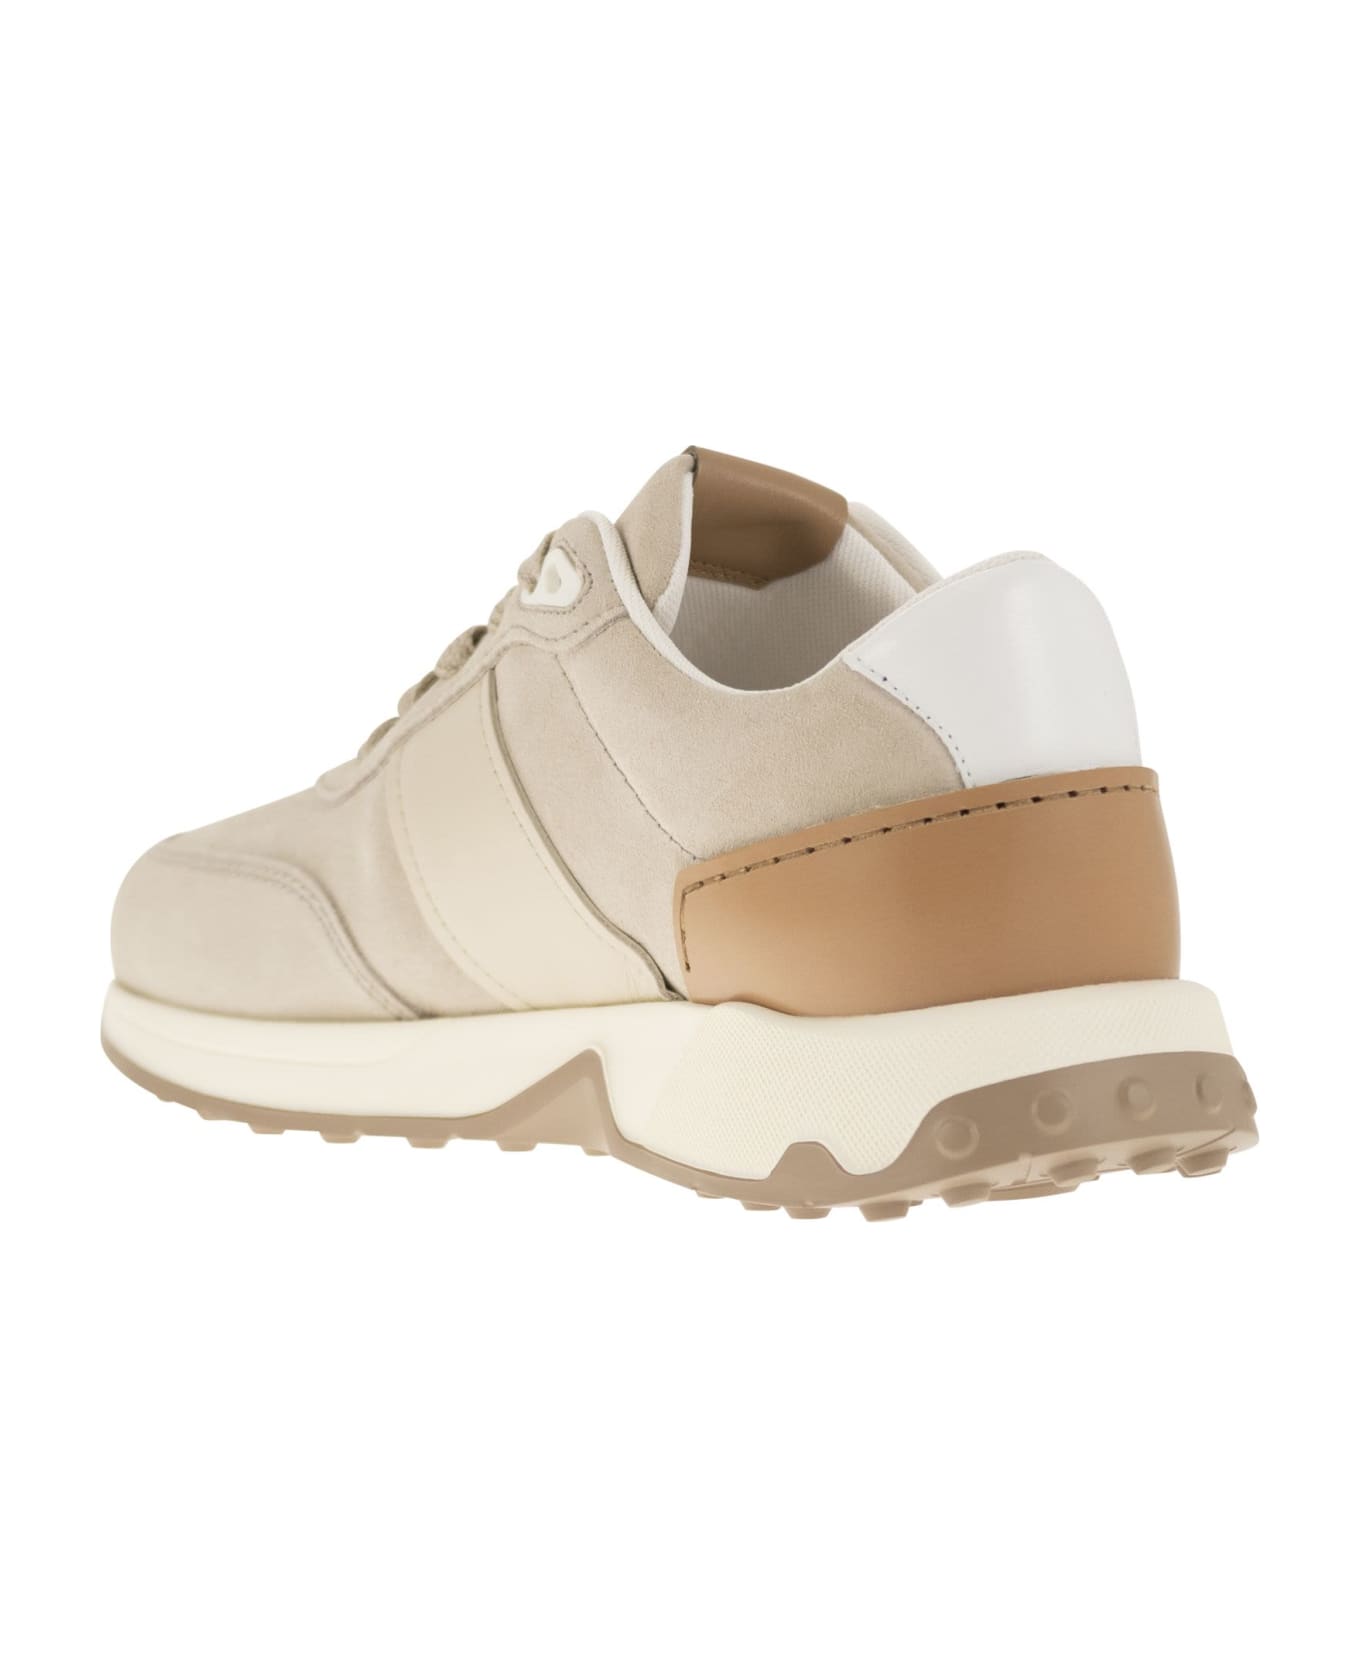 Tod's Suede Leather Sneakers - Sand